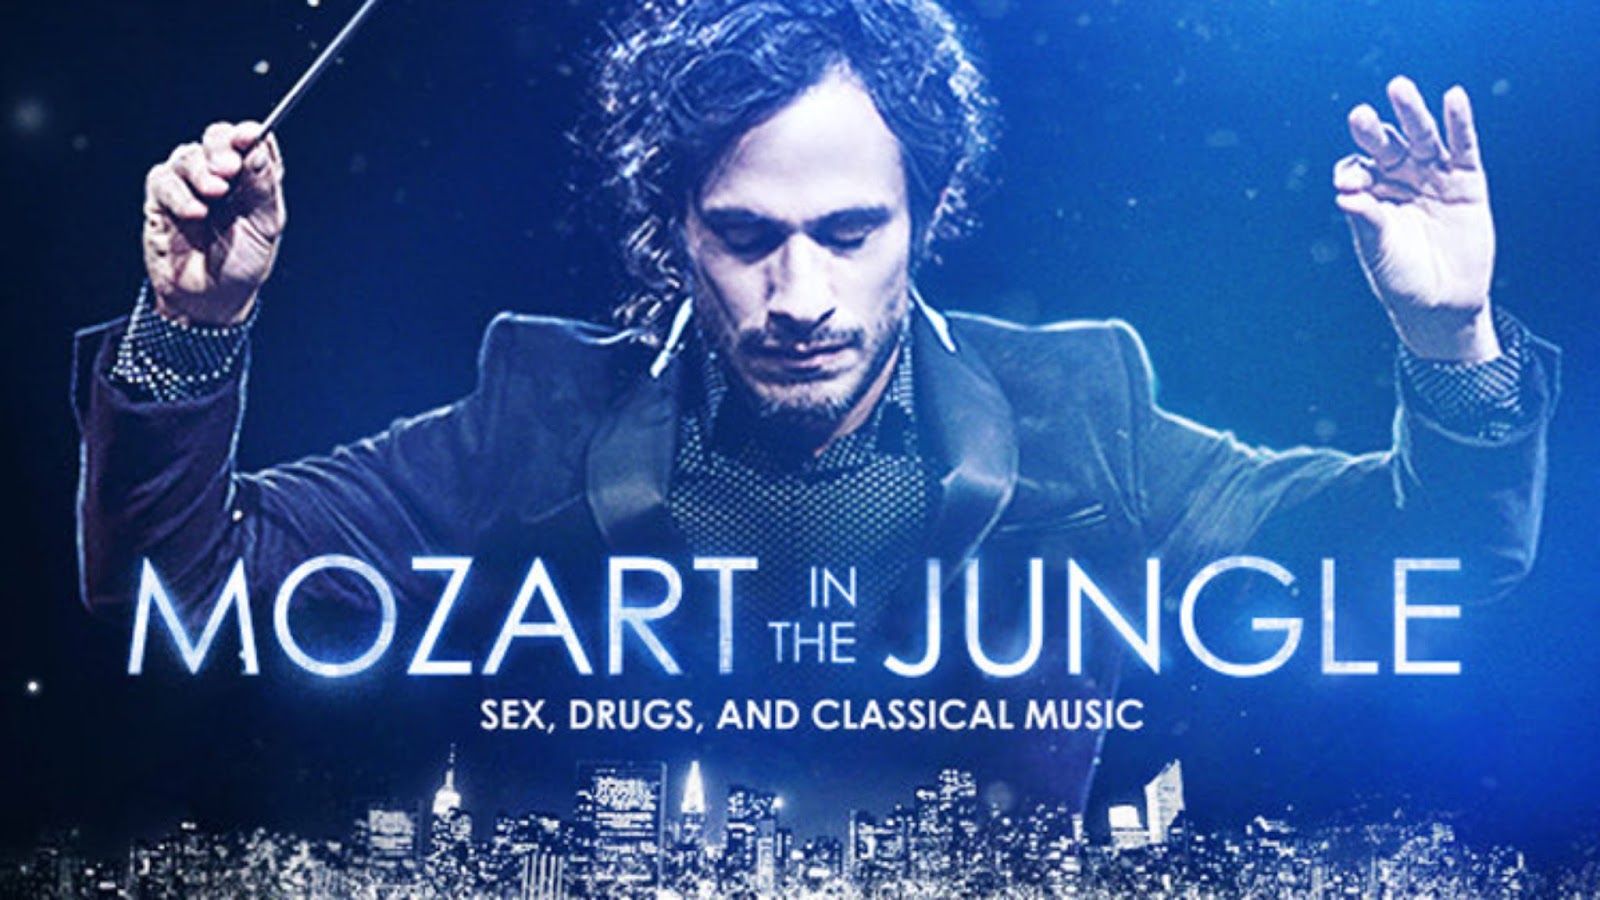 Mozart In The Jungle Wallpaper Image Group